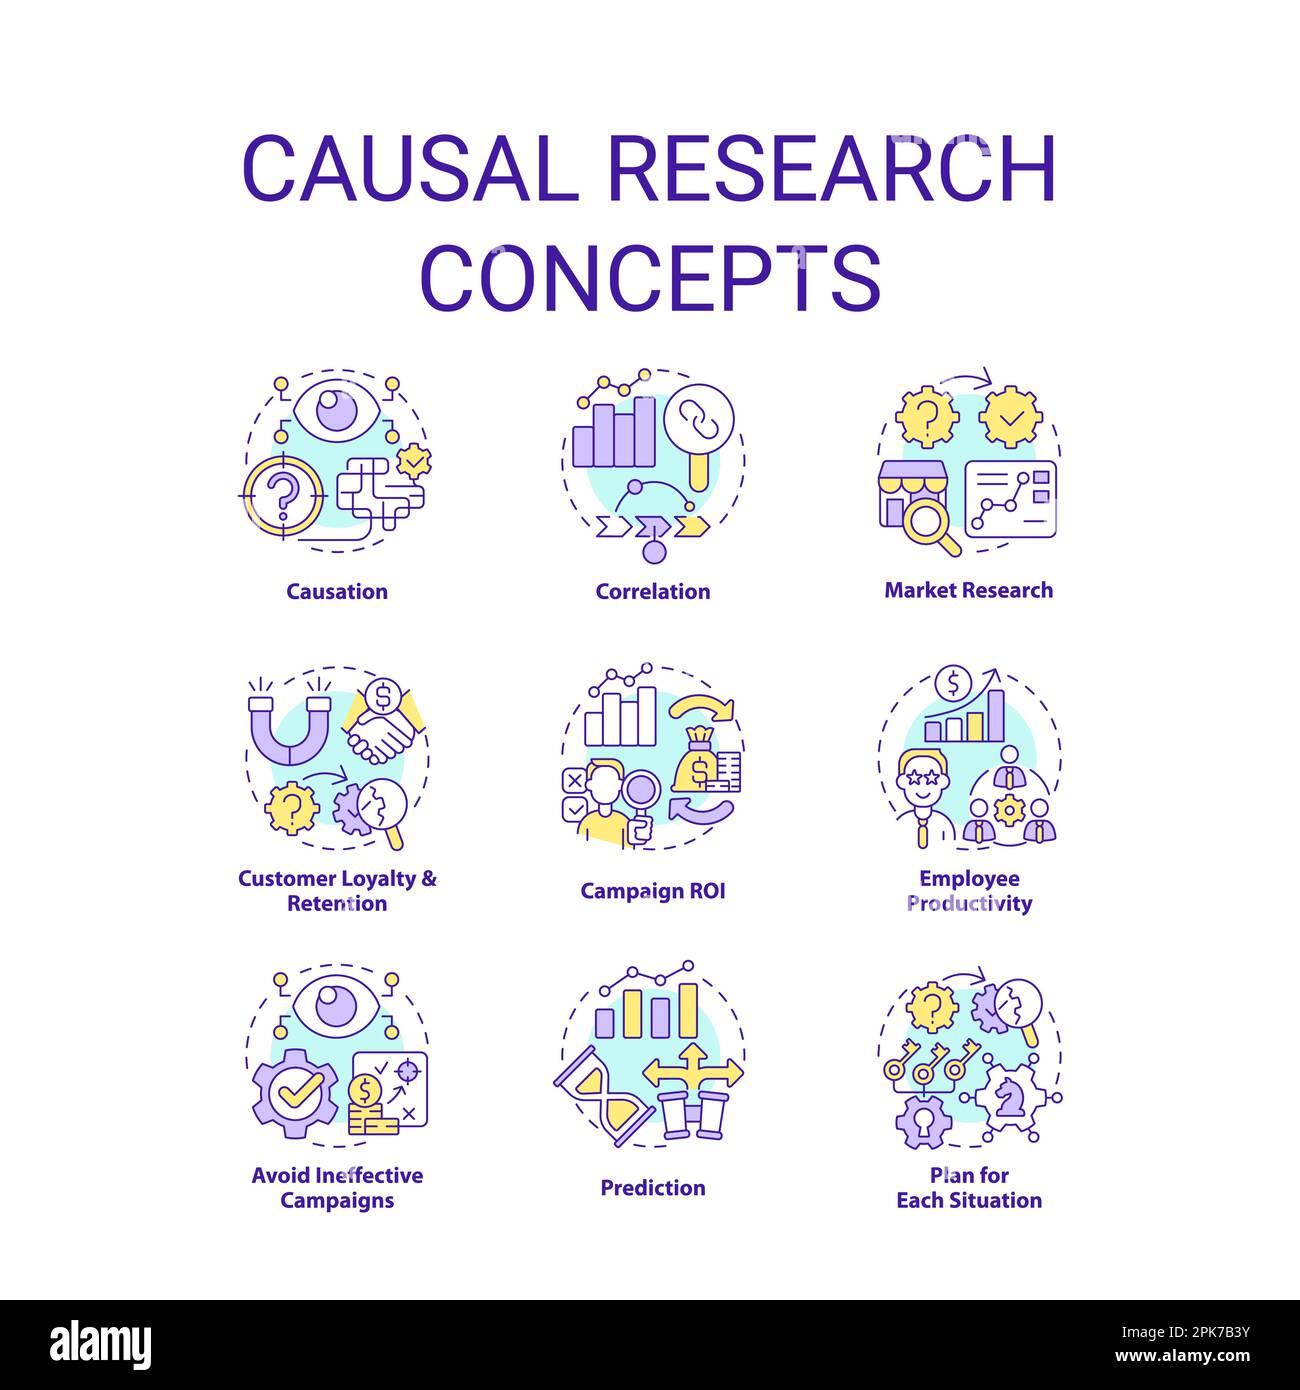 Causal research concept icons set Stock Vector